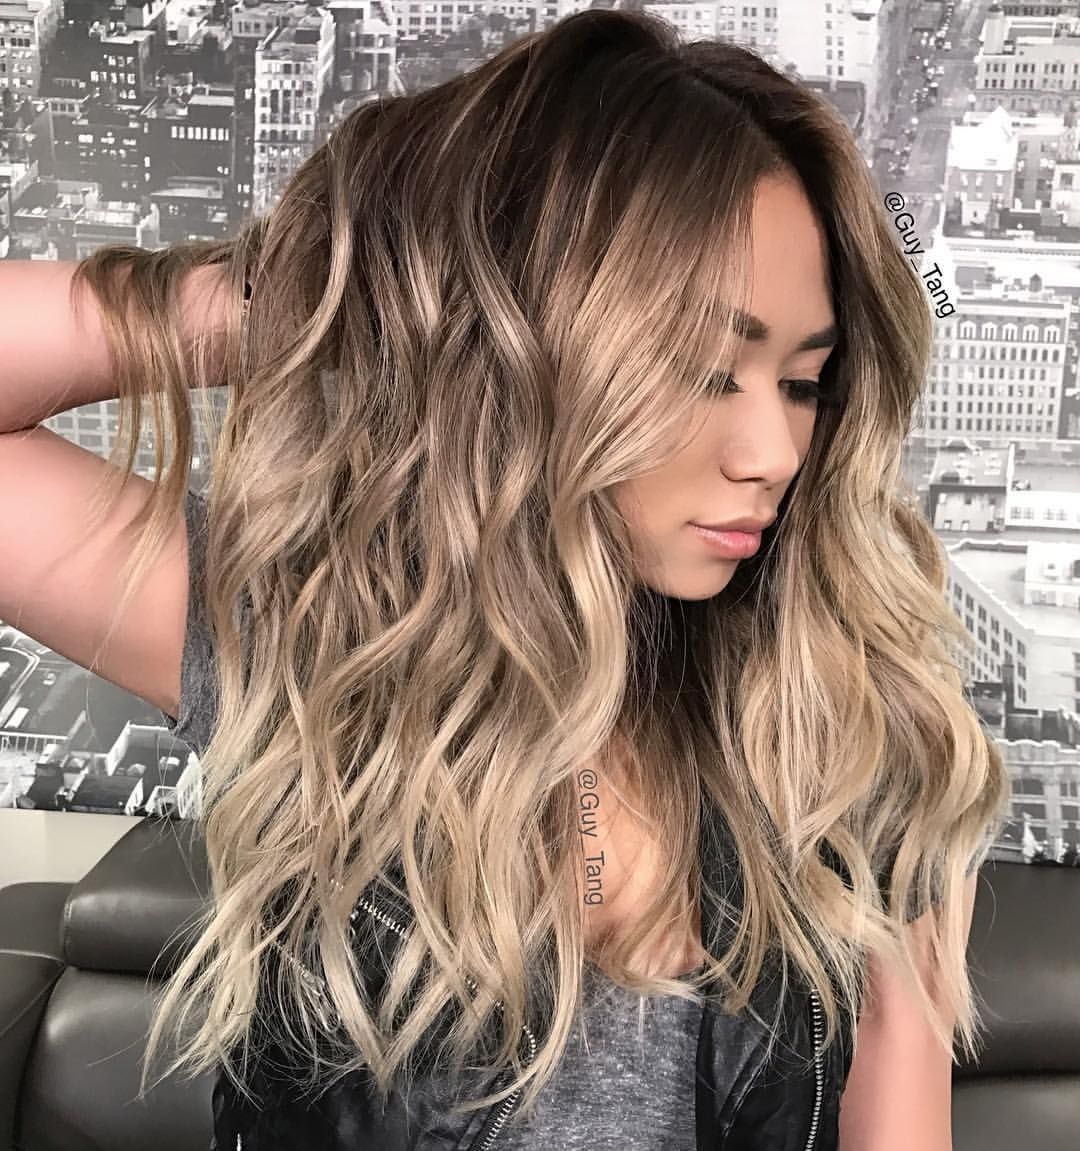 7 Things you need to know before you get highlights on your Asian hair |  BURO.